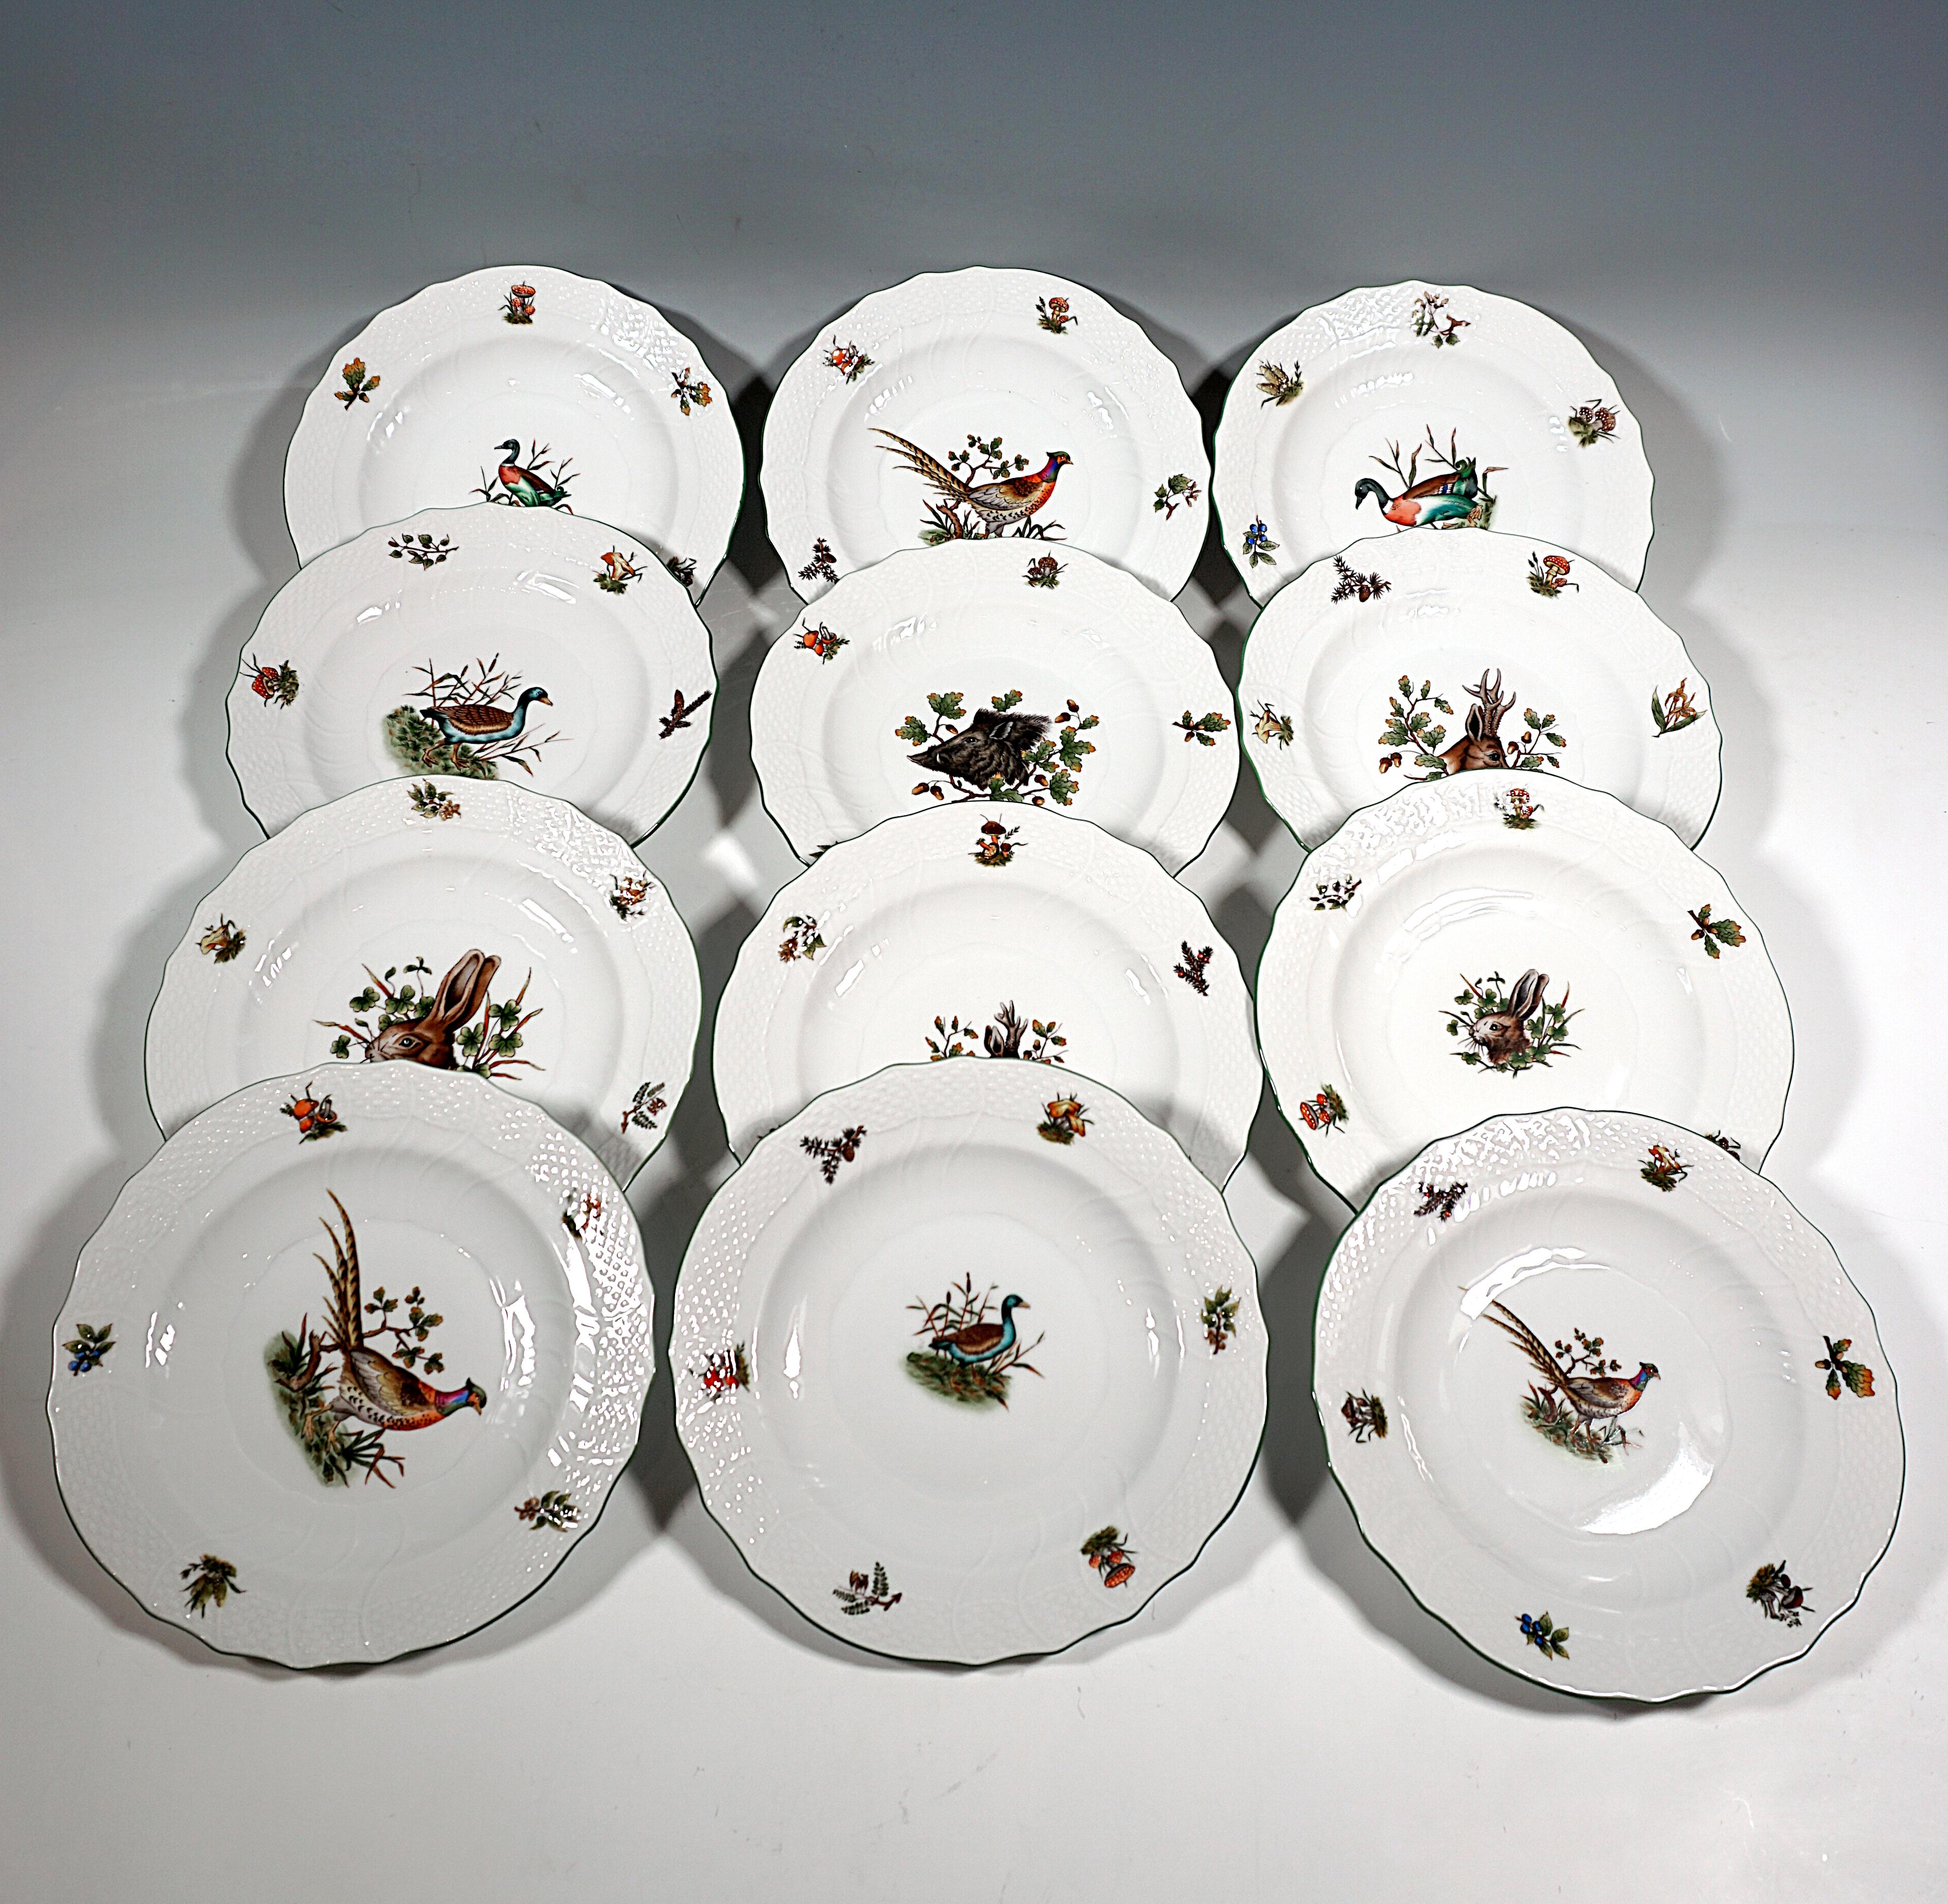 Painted Dinner Set For 12 Persons 'Classic Hunter Trophies' Herend Hungary, 20th Century